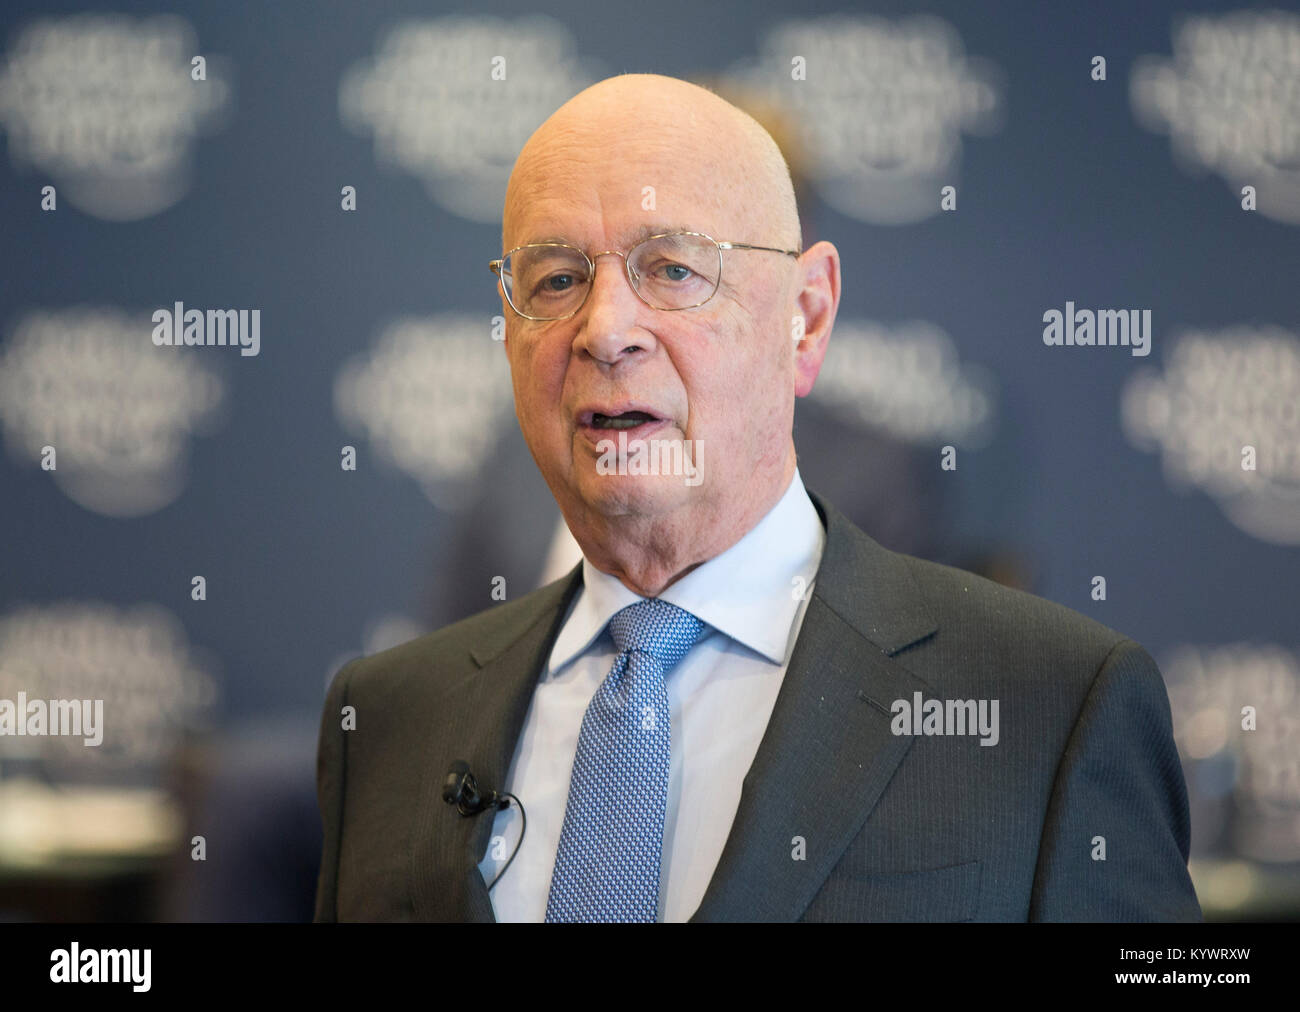 Geneva, Switzerland. 16th Jan, 2018. Klaus Schwab, founder and chief executive of the World Economic Forum (WEF), speaks at a press conference in Geneva, Switzerland, Jan. 16, 2018. Schwab said Tuesday that he expects an 'important moment' in Davos when China shares with the world new information about its economic development. Credit: Xu Jinquan/Xinhua/Alamy Live News Stock Photo